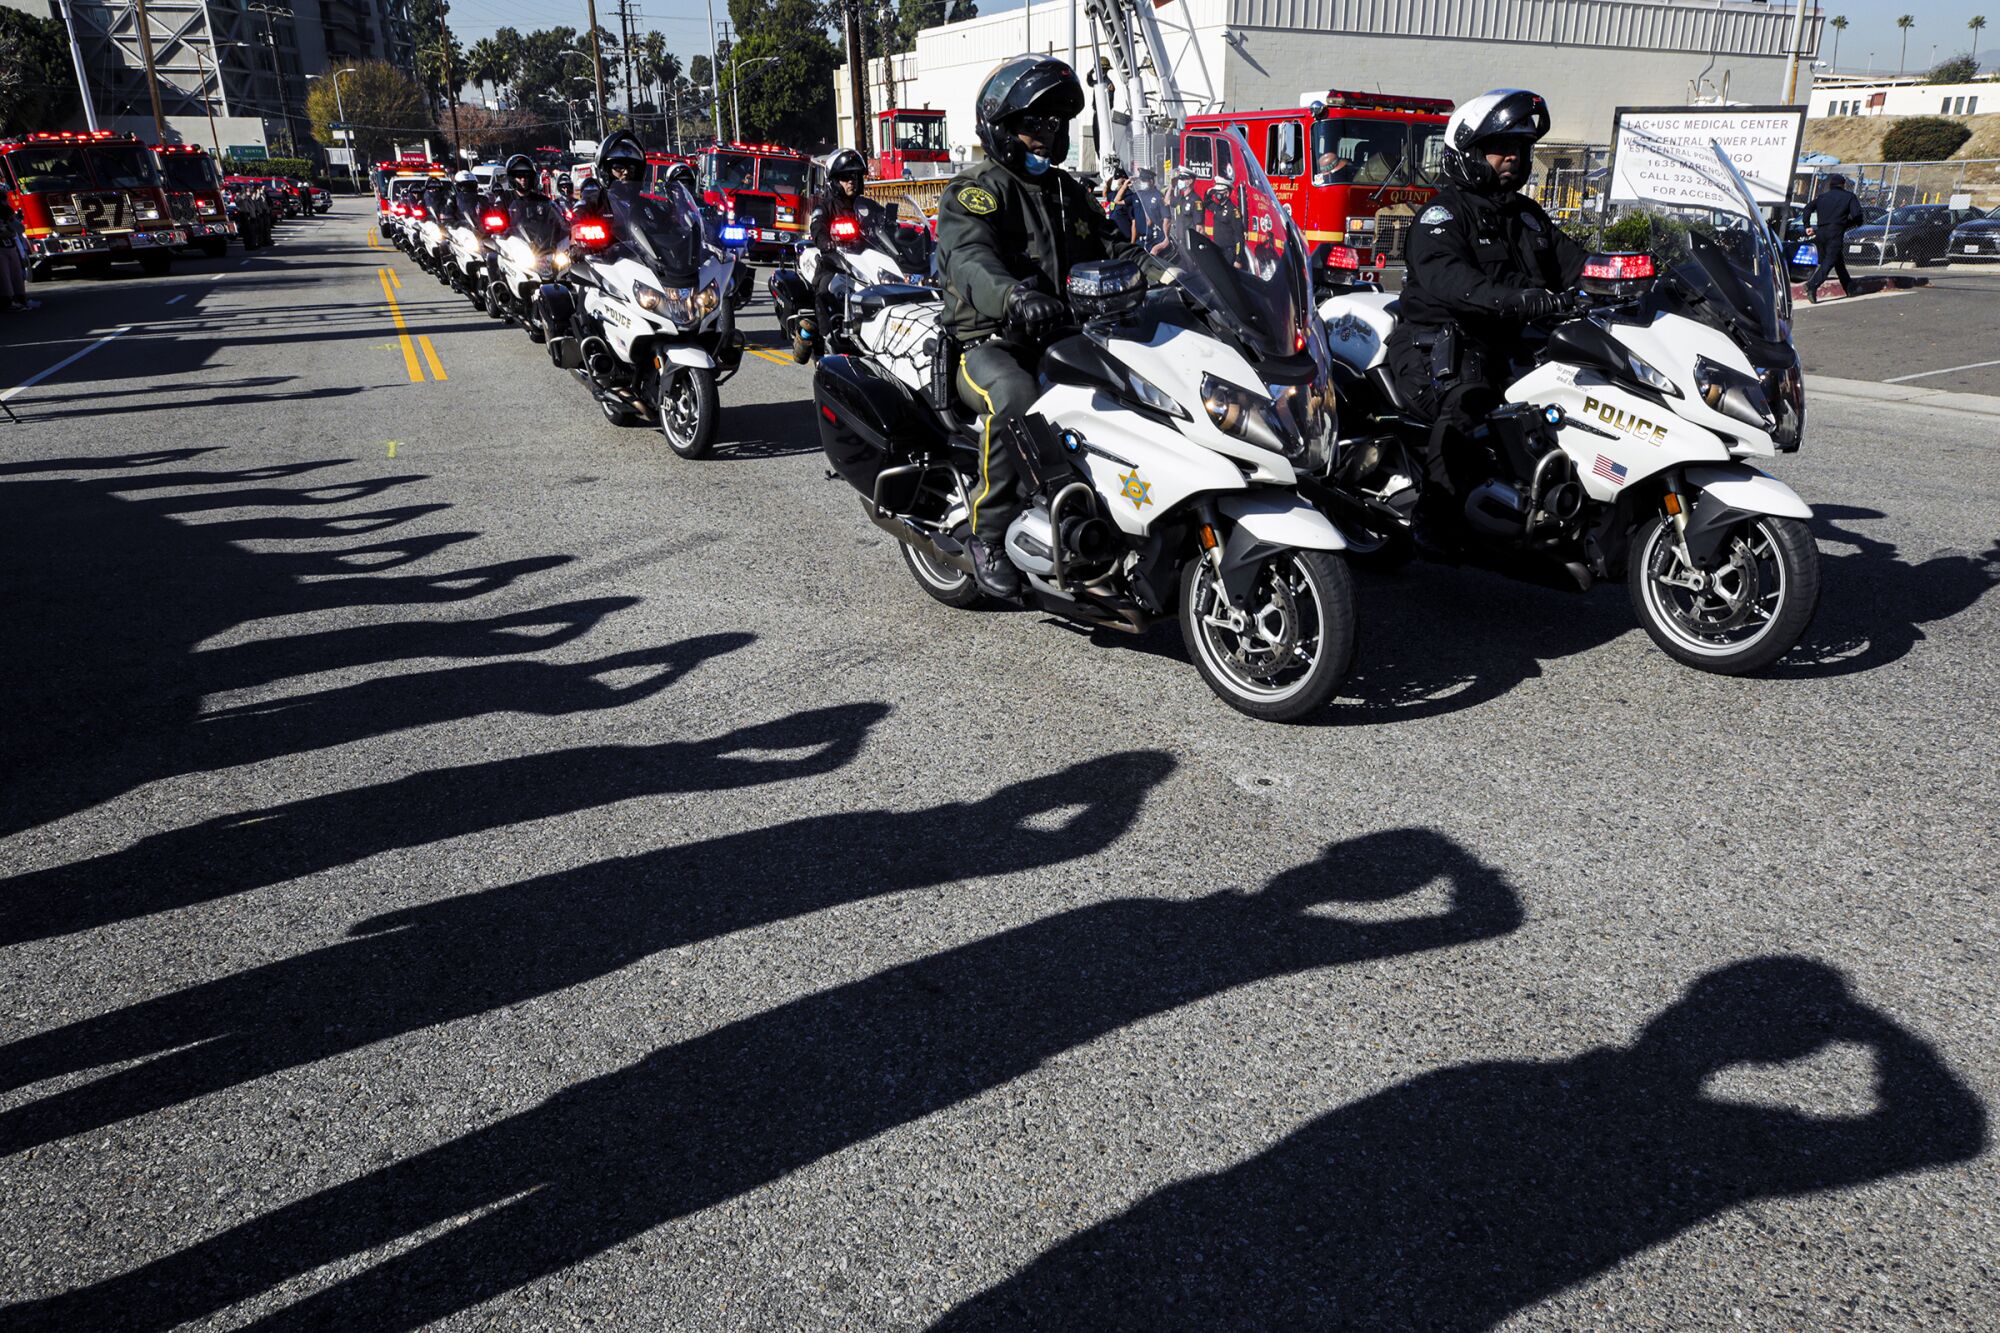 A line of police officers on motorcycles drive down a street